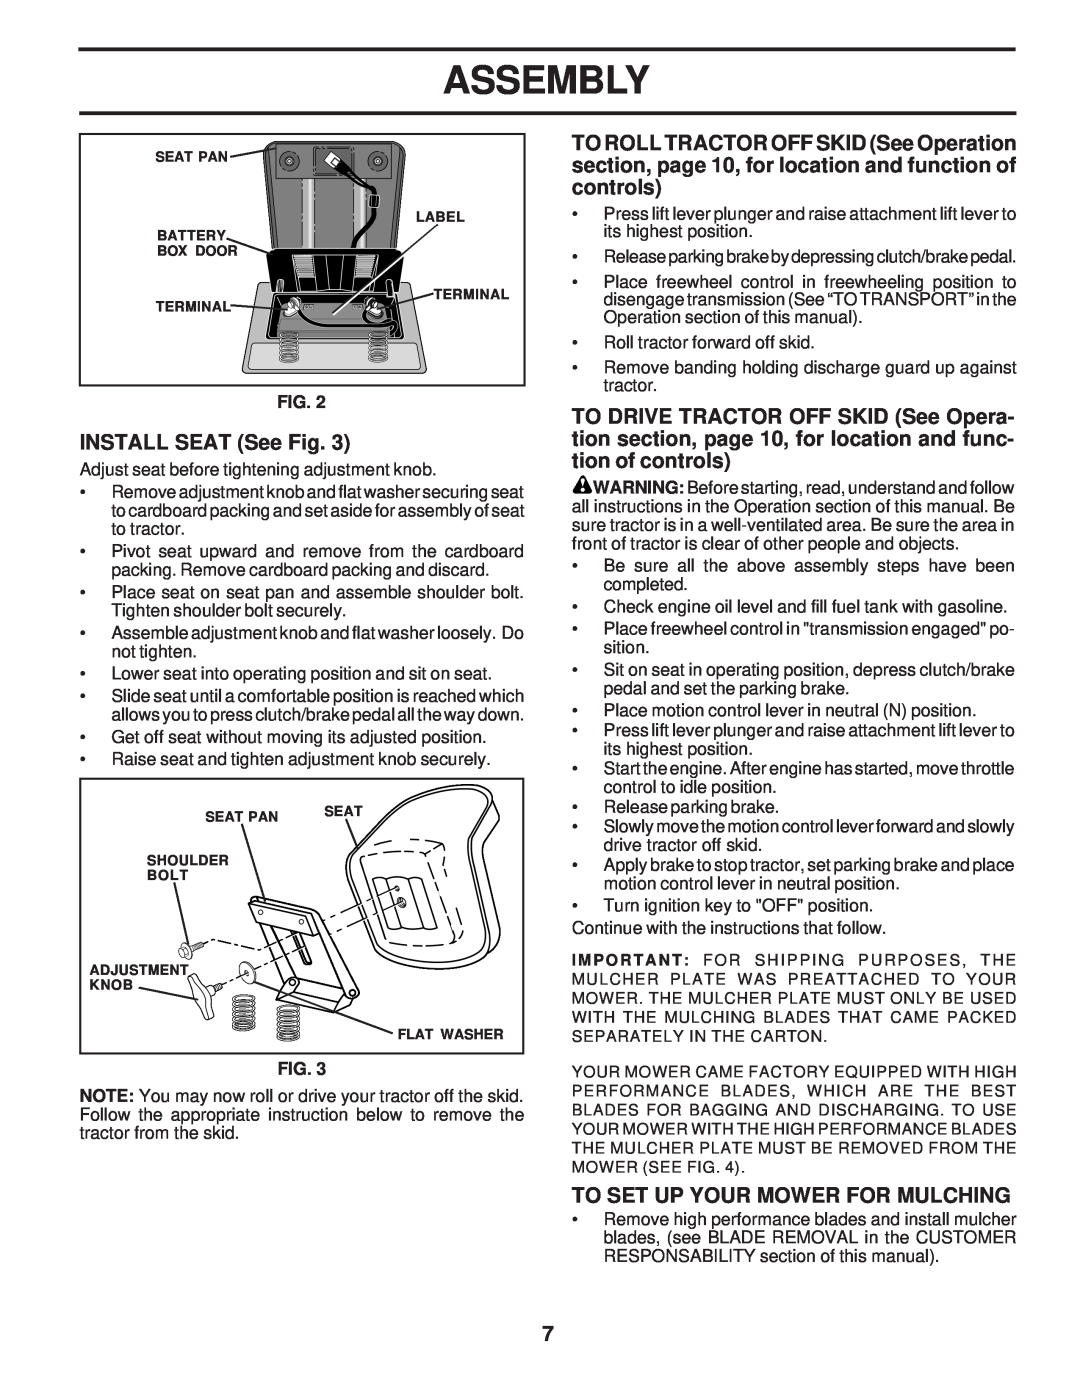 Poulan 173284, PPR17H42STC owner manual INSTALL SEAT See Fig, To Set Up Your Mower For Mulching, Assembly 